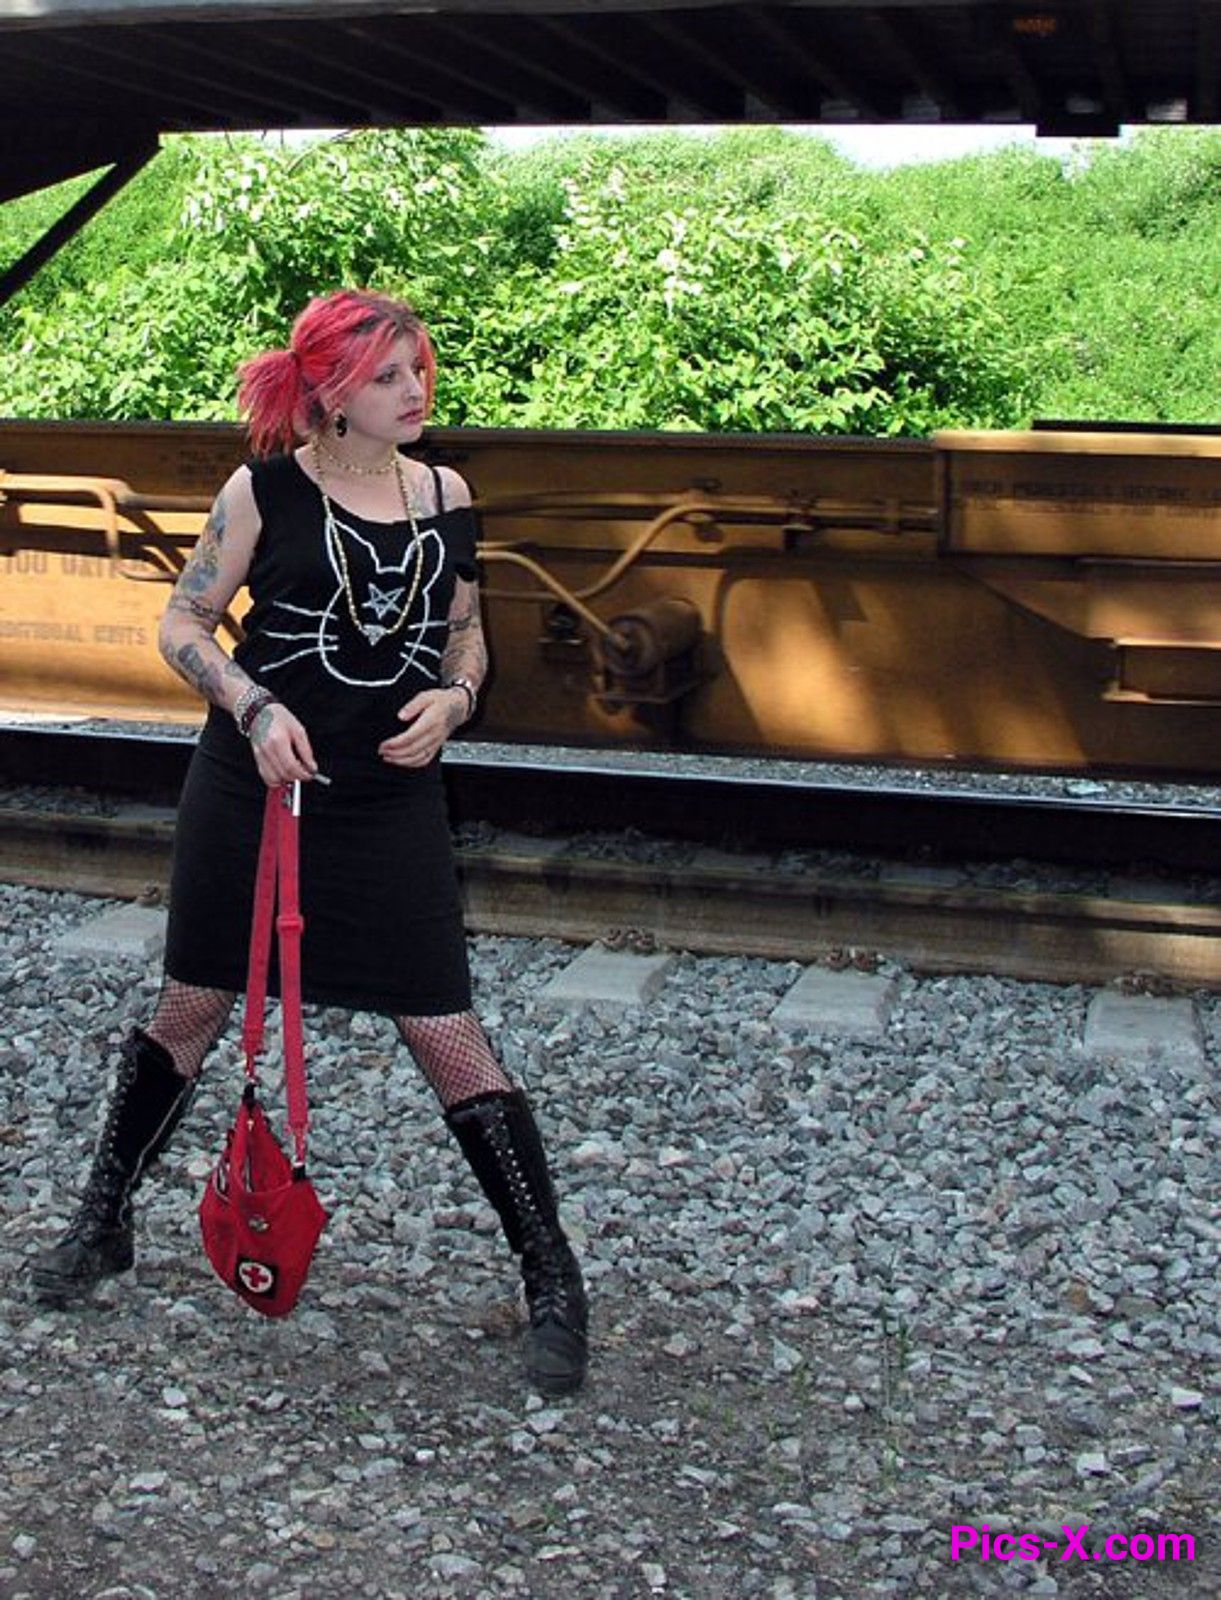 Pink haired goth babe posing on some train tracks - Punk Rock Girlfriend - Image 1